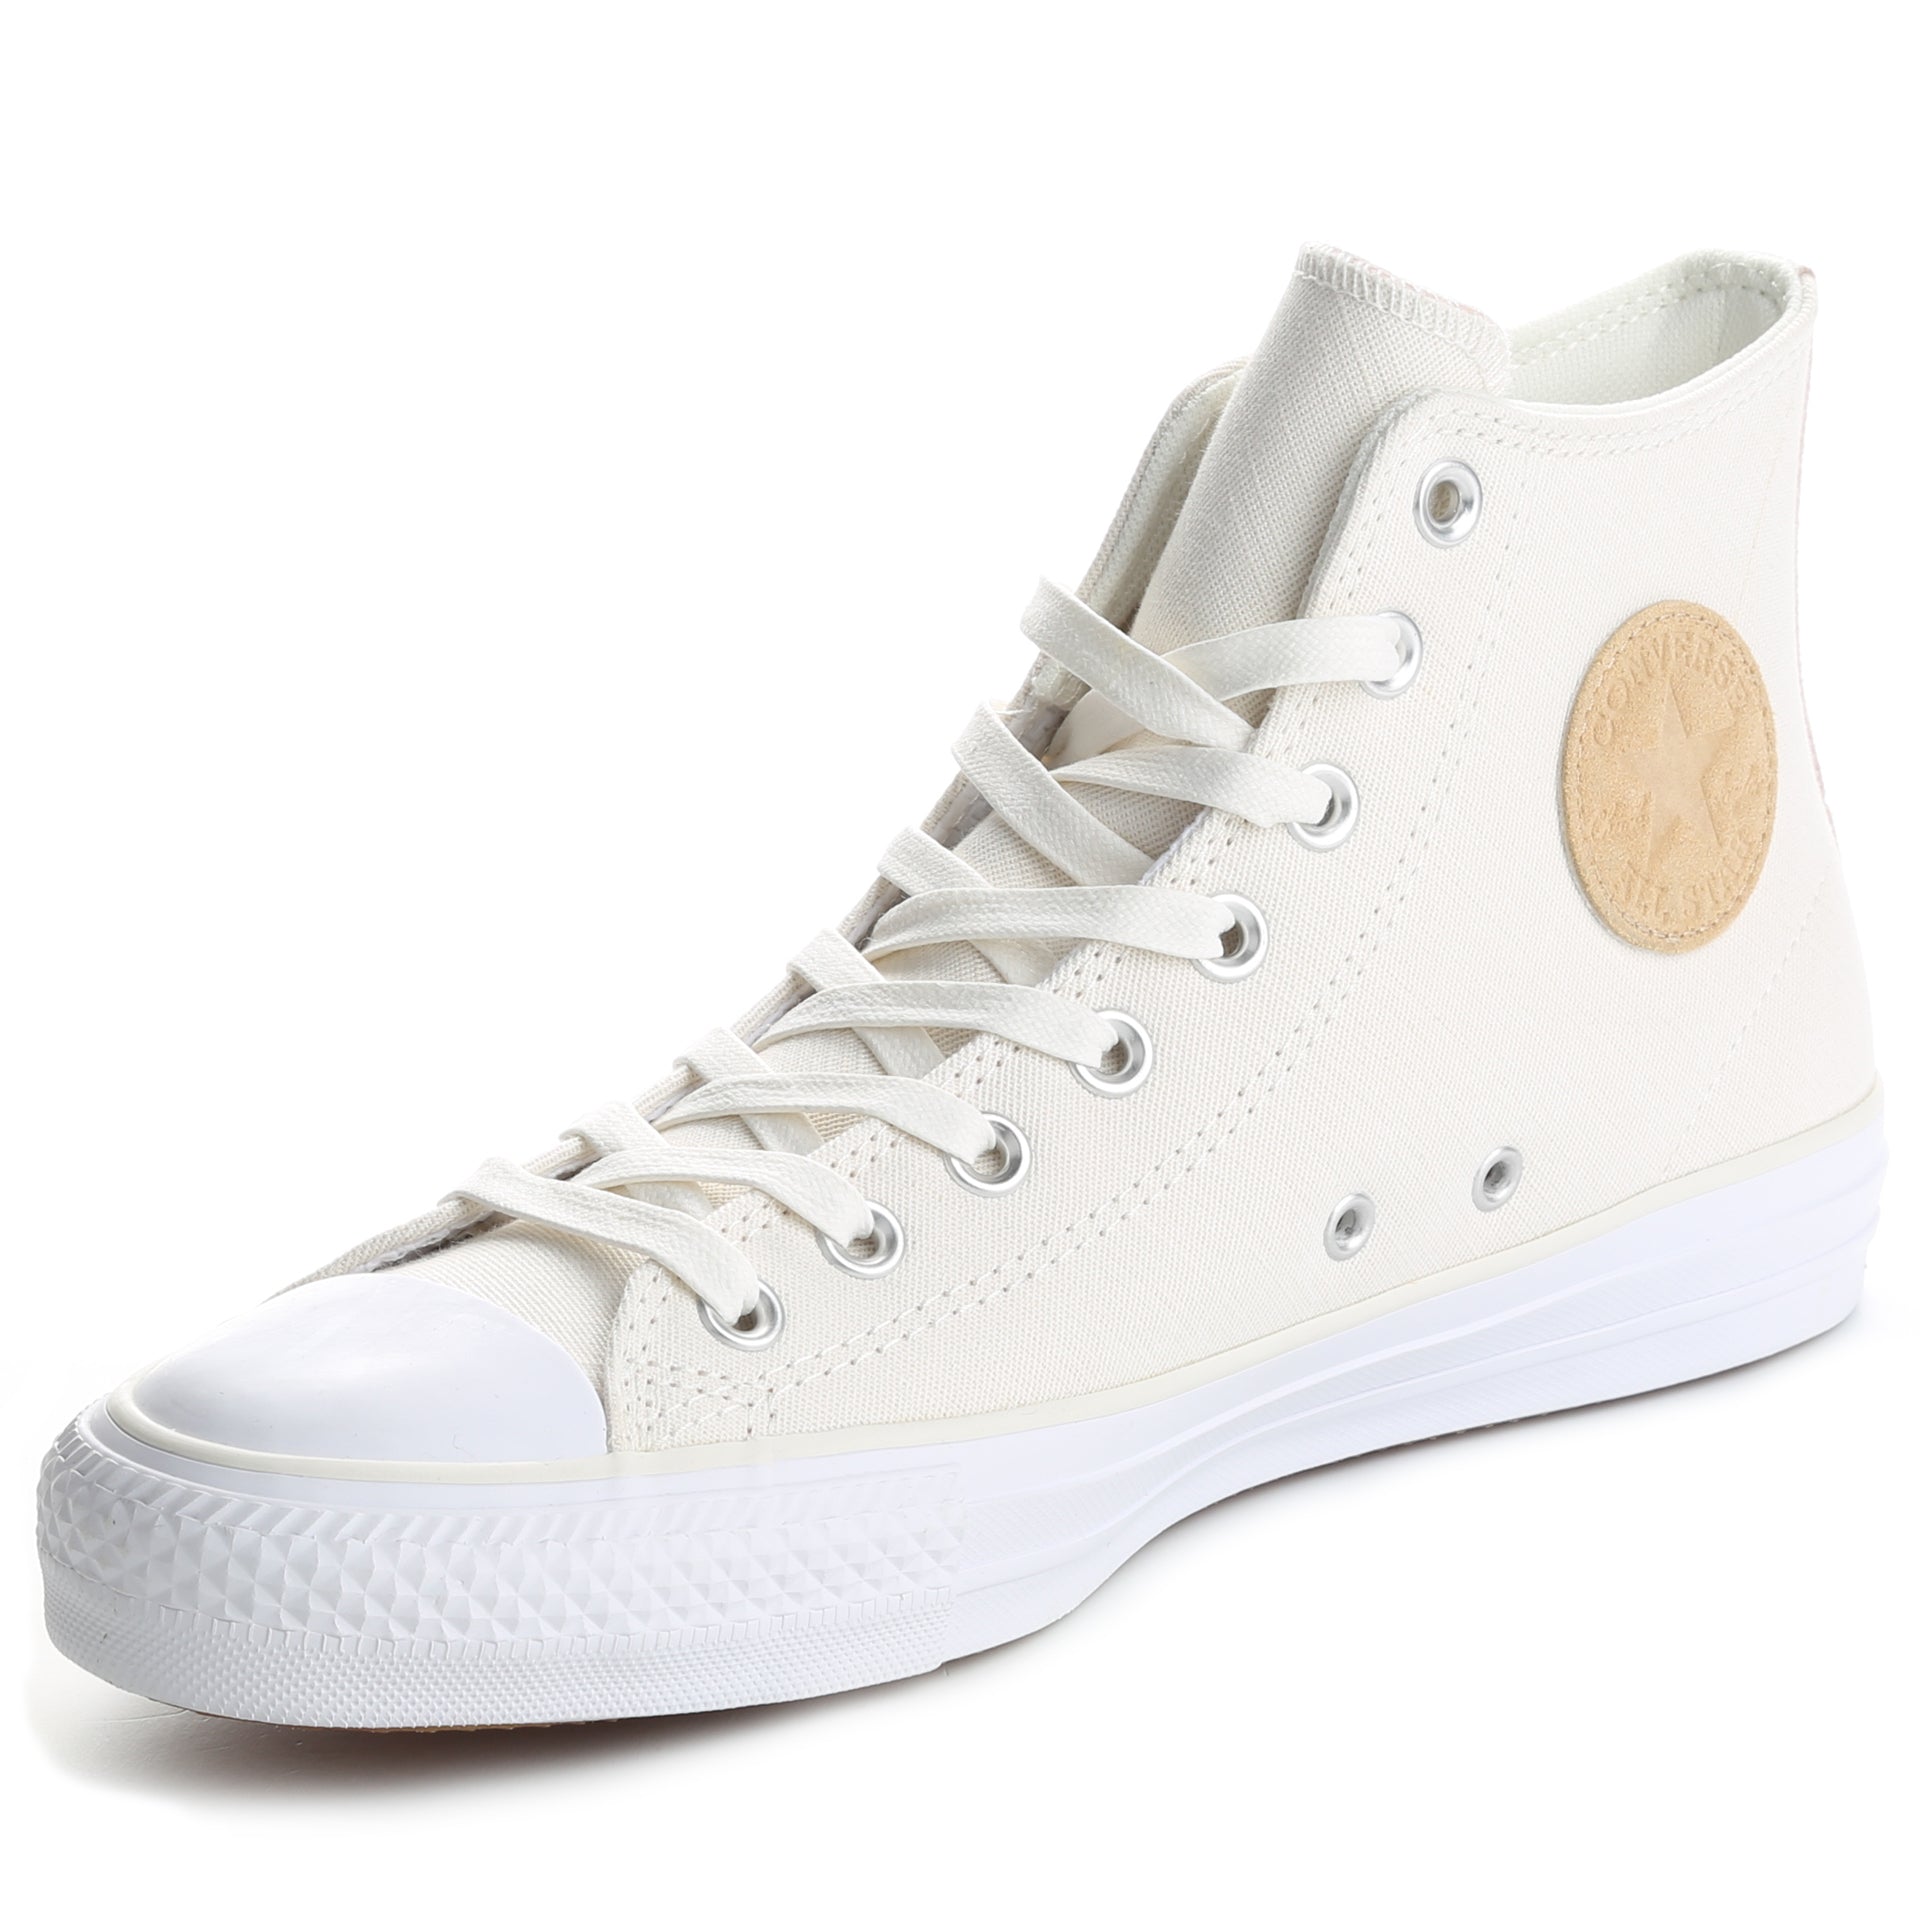 Converse CTAS Pro Suede Backed Twill 